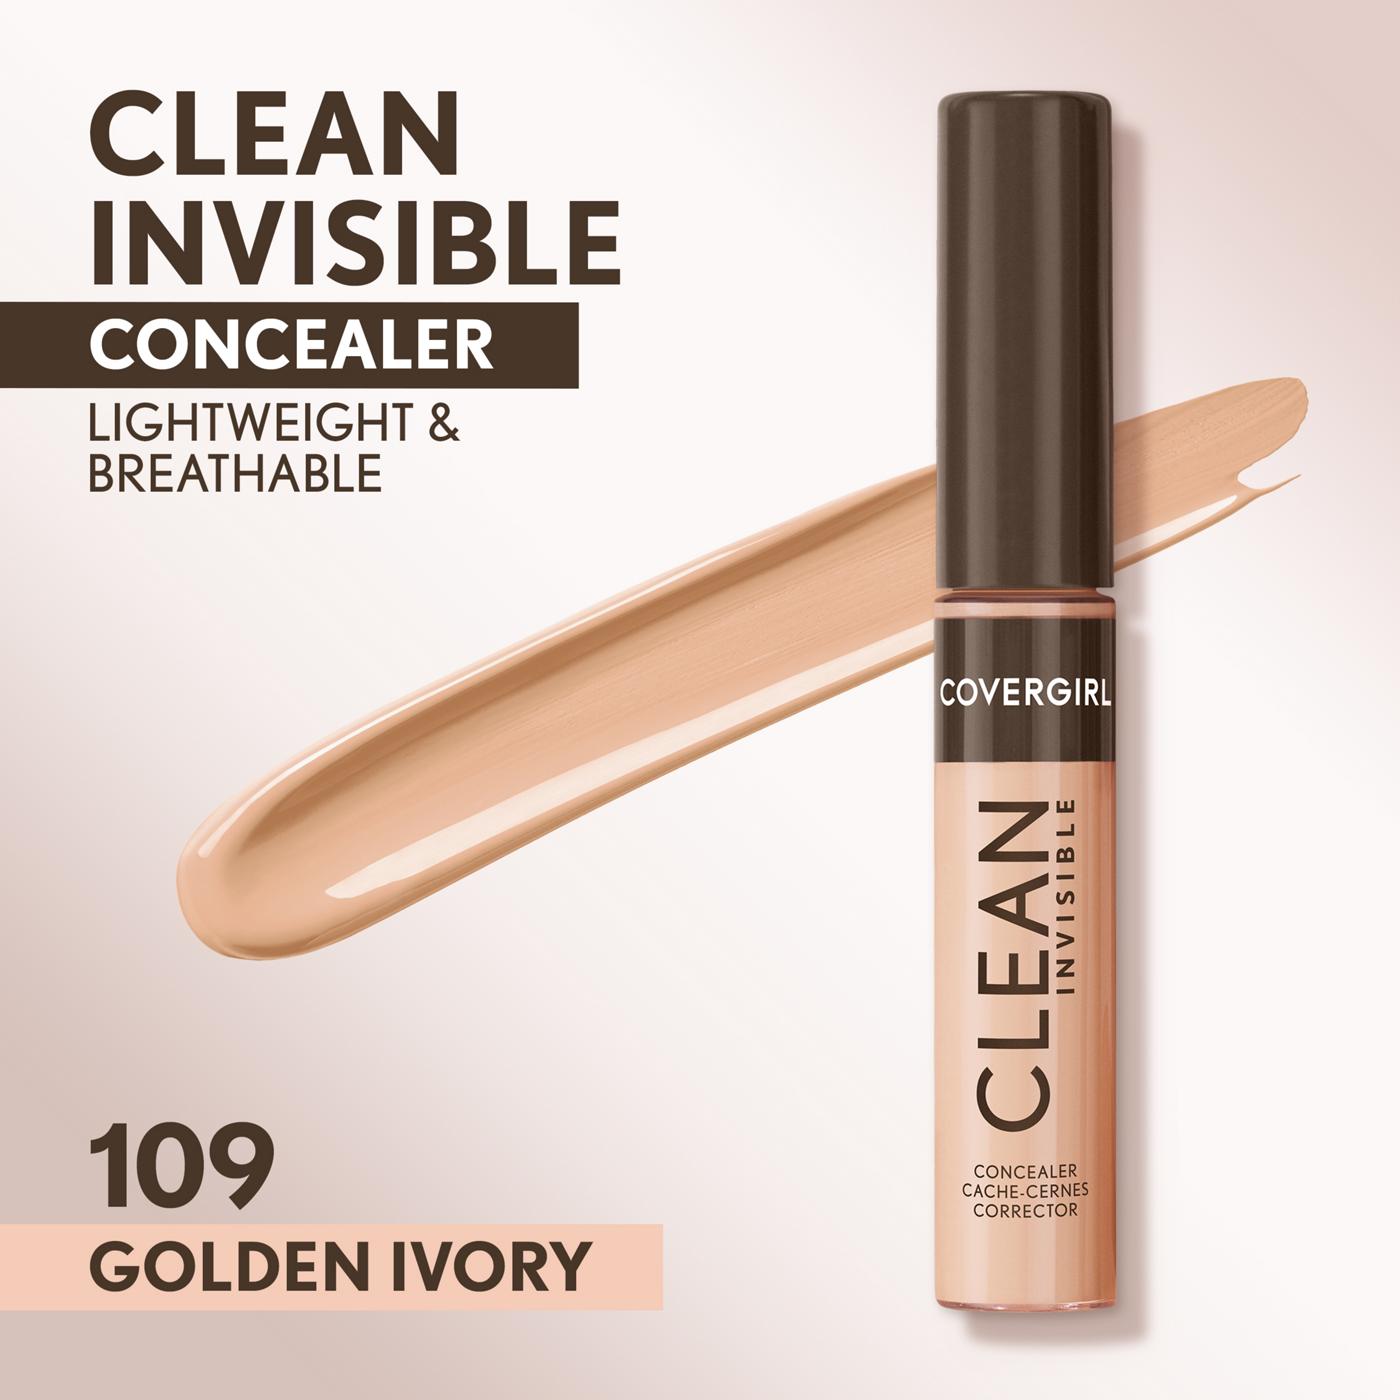 Covergirl Clean Invisible Concealer - Golden Ivory; image 6 of 14